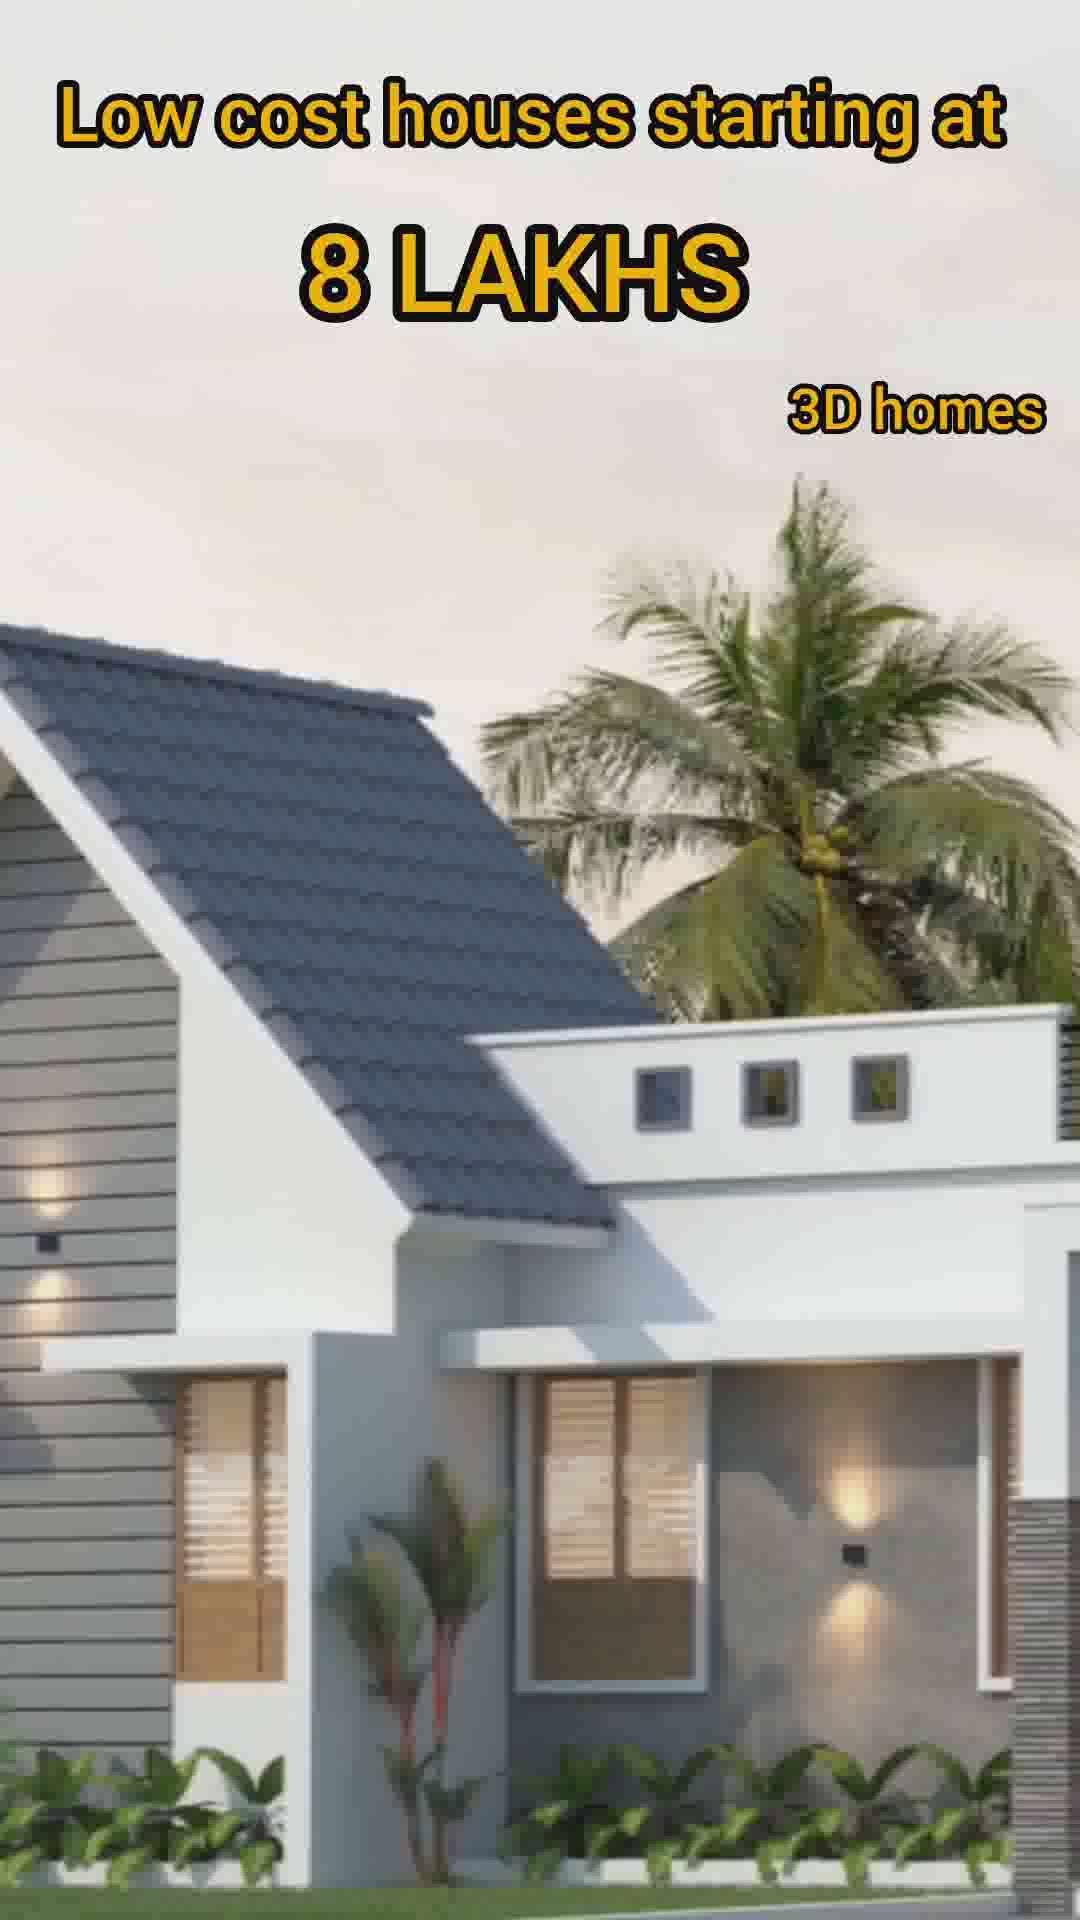 low cost houses for 8 lakhs  #lowcostarchitecture #lowcostconstruction #lowbudgetdesign #housestyle #ContemporaryDesigns #ContemporaryDesigns